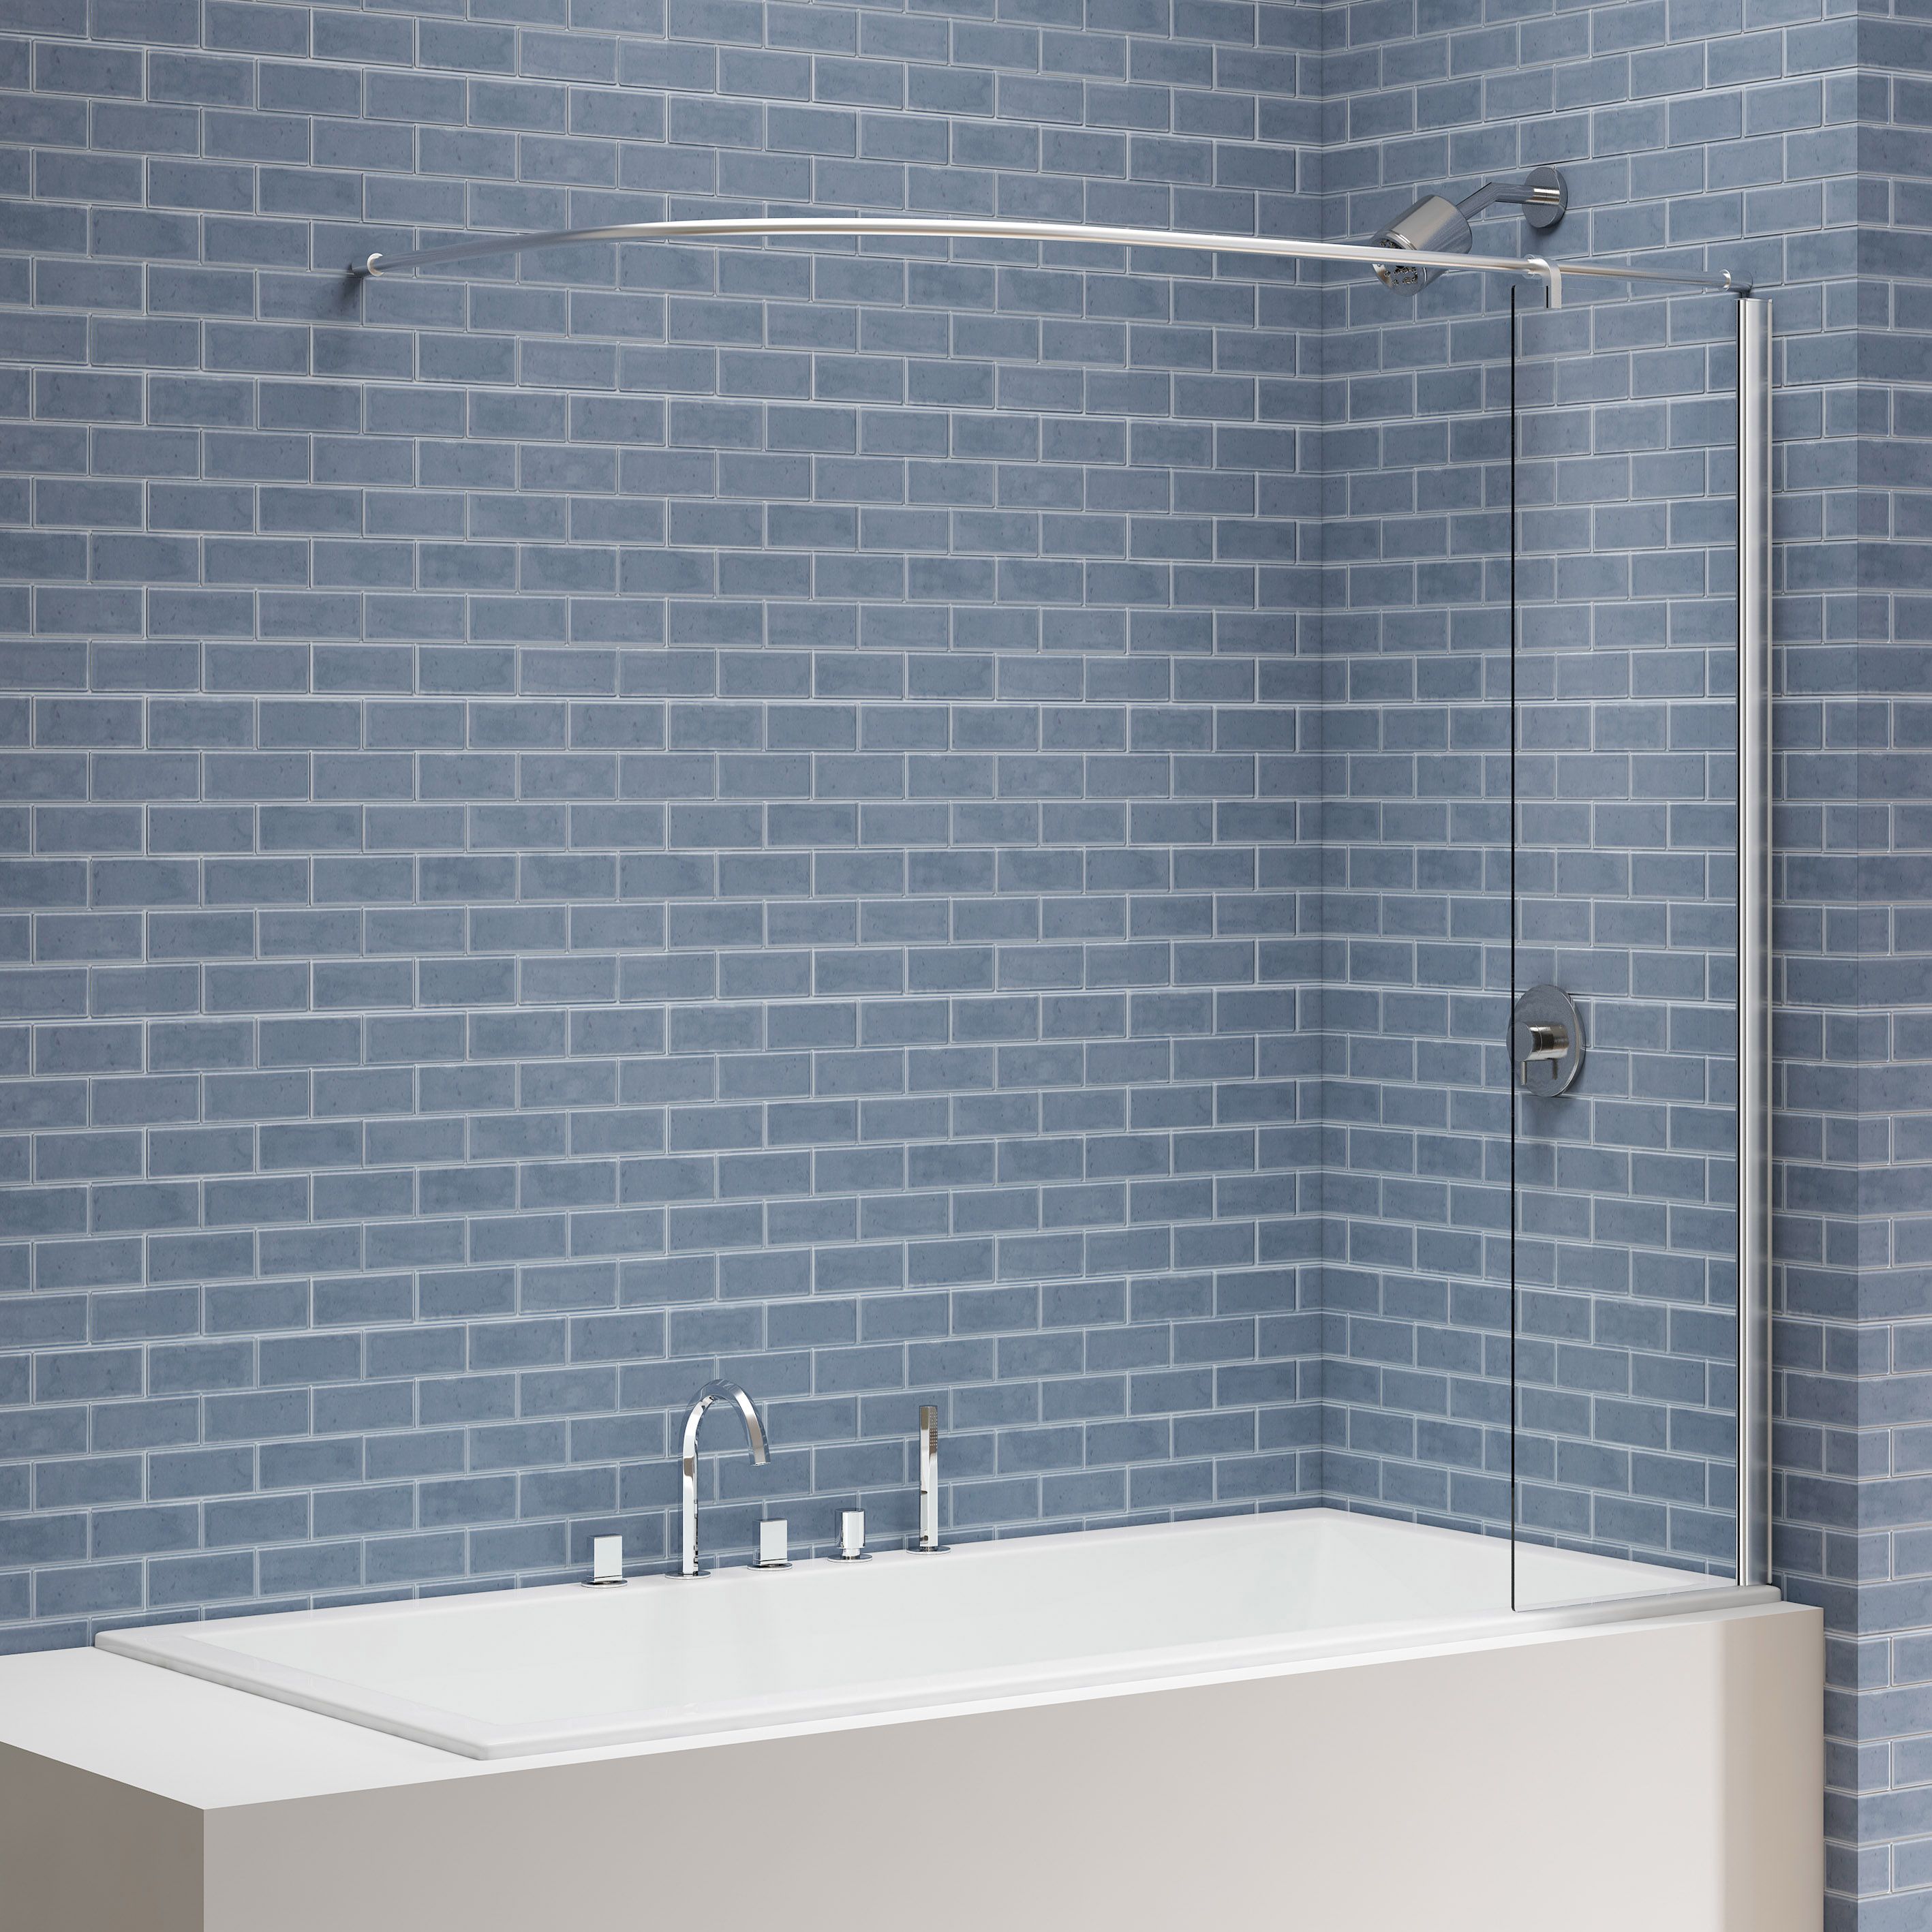 Image of Nexa By Merlyn 6mm Square Bath Screen with Curtain Rail & Panel - 1500 x 300mm